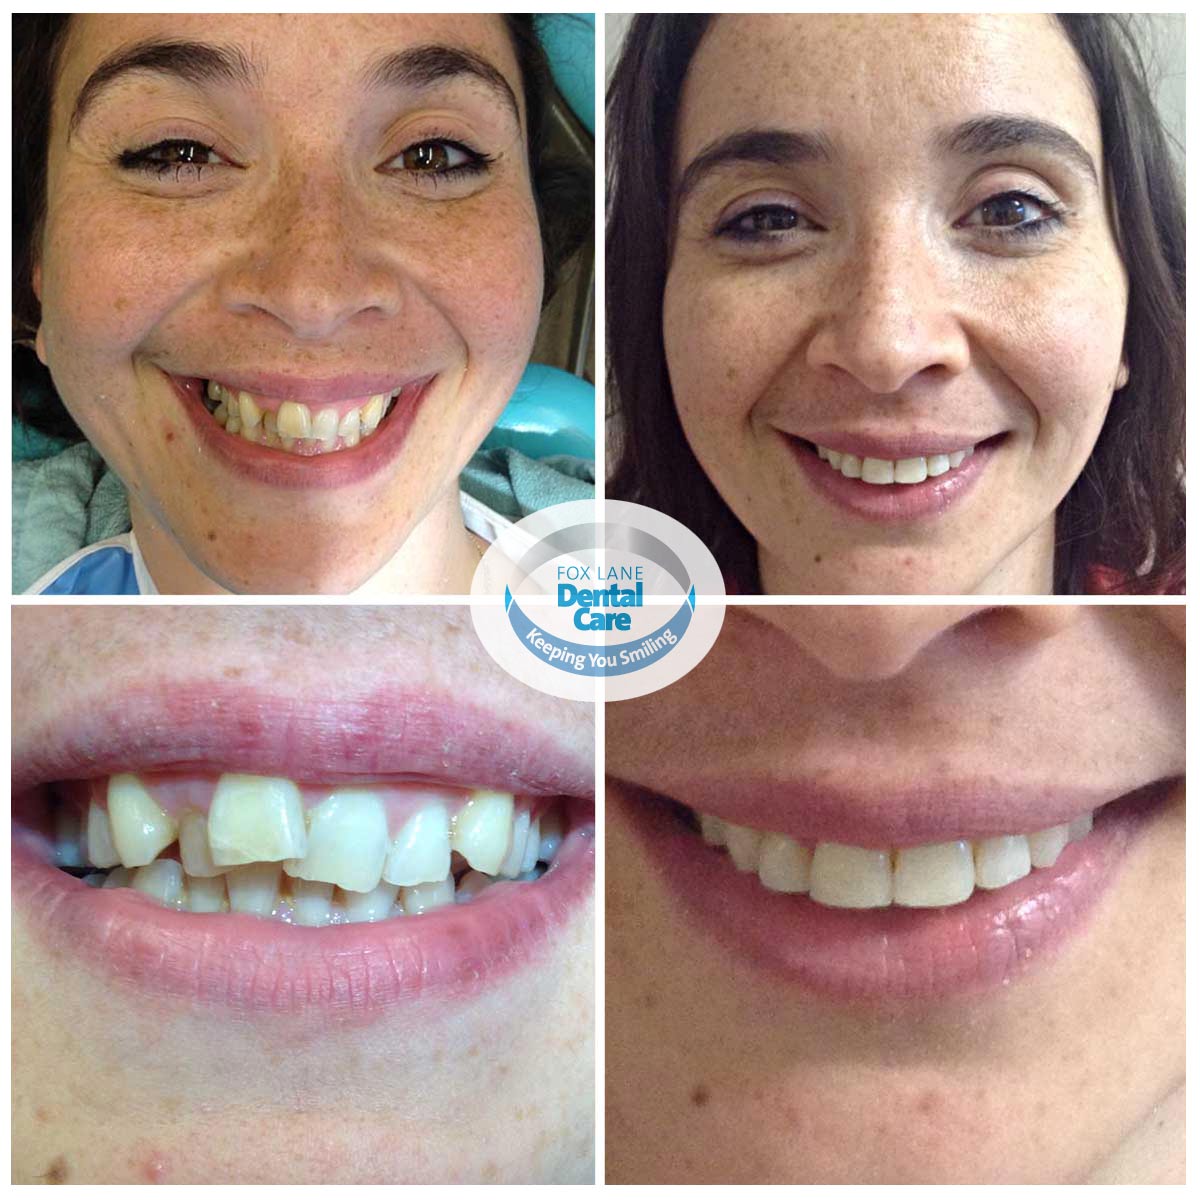 See the gallery of before and after Orthodontic treatment and smile makeovers by Fox Lane Dental Care.